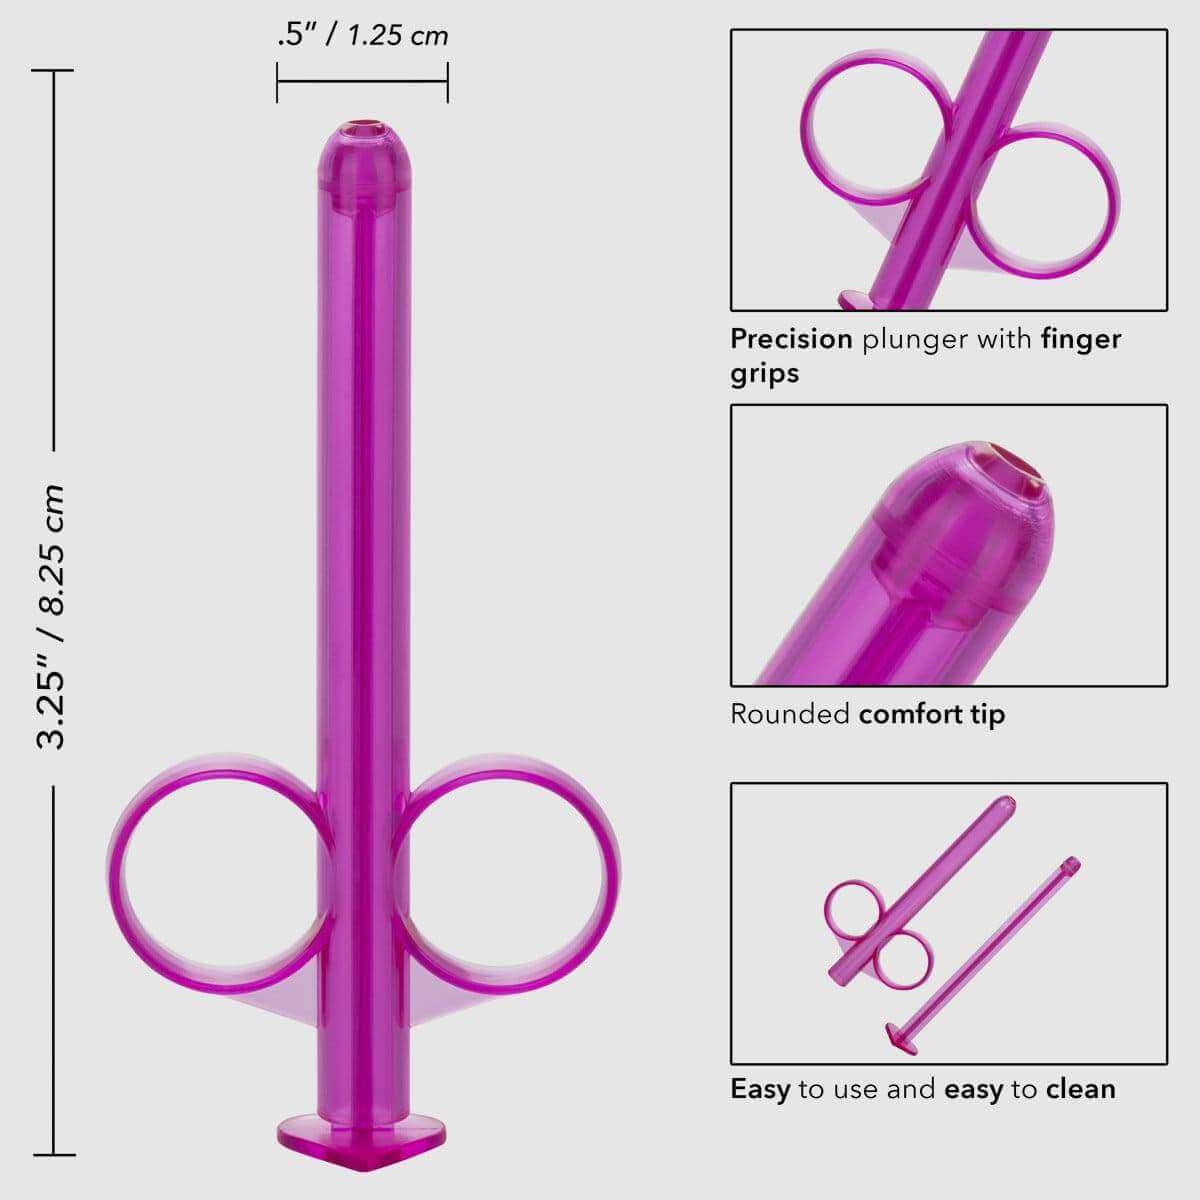 Lube Tube Applicator 2 Pack - Purple - Thorn & Feather Sex Toy Canada